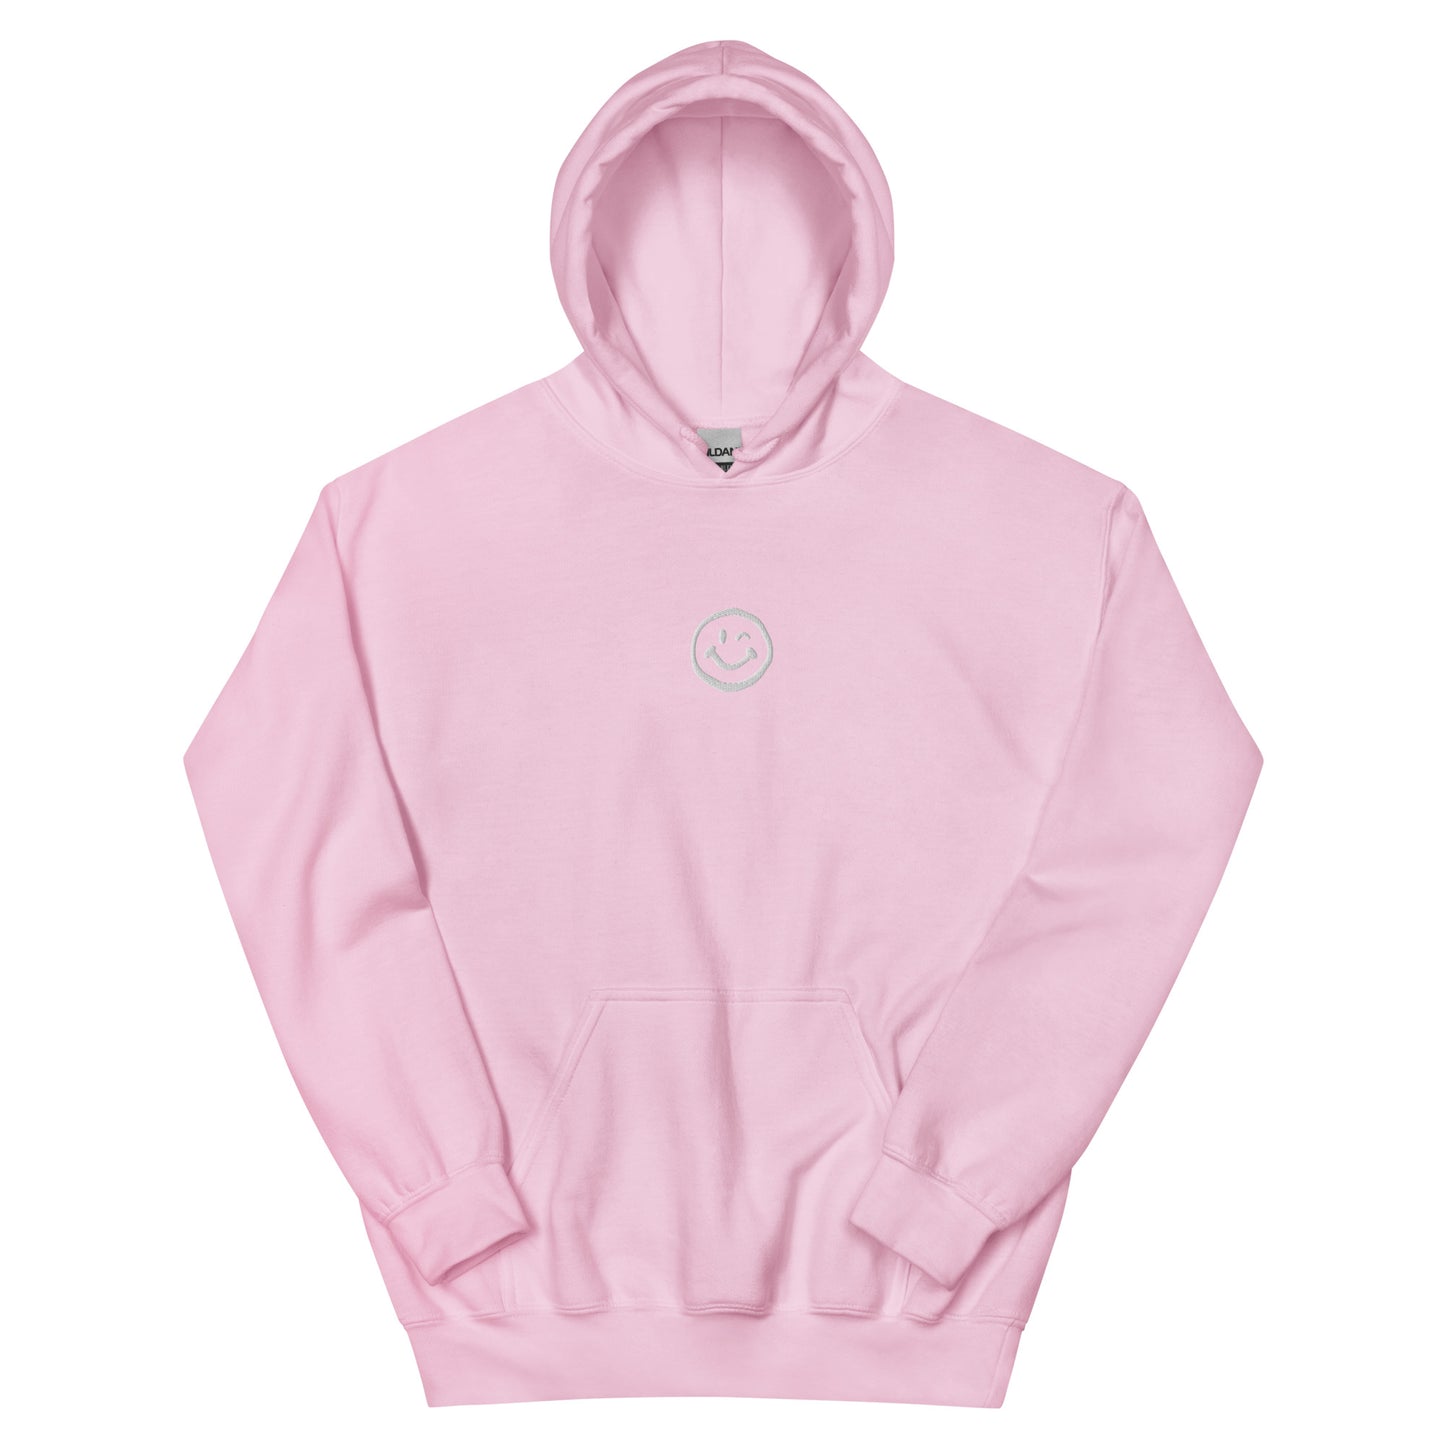 Smiley Hoodie - Embroidered